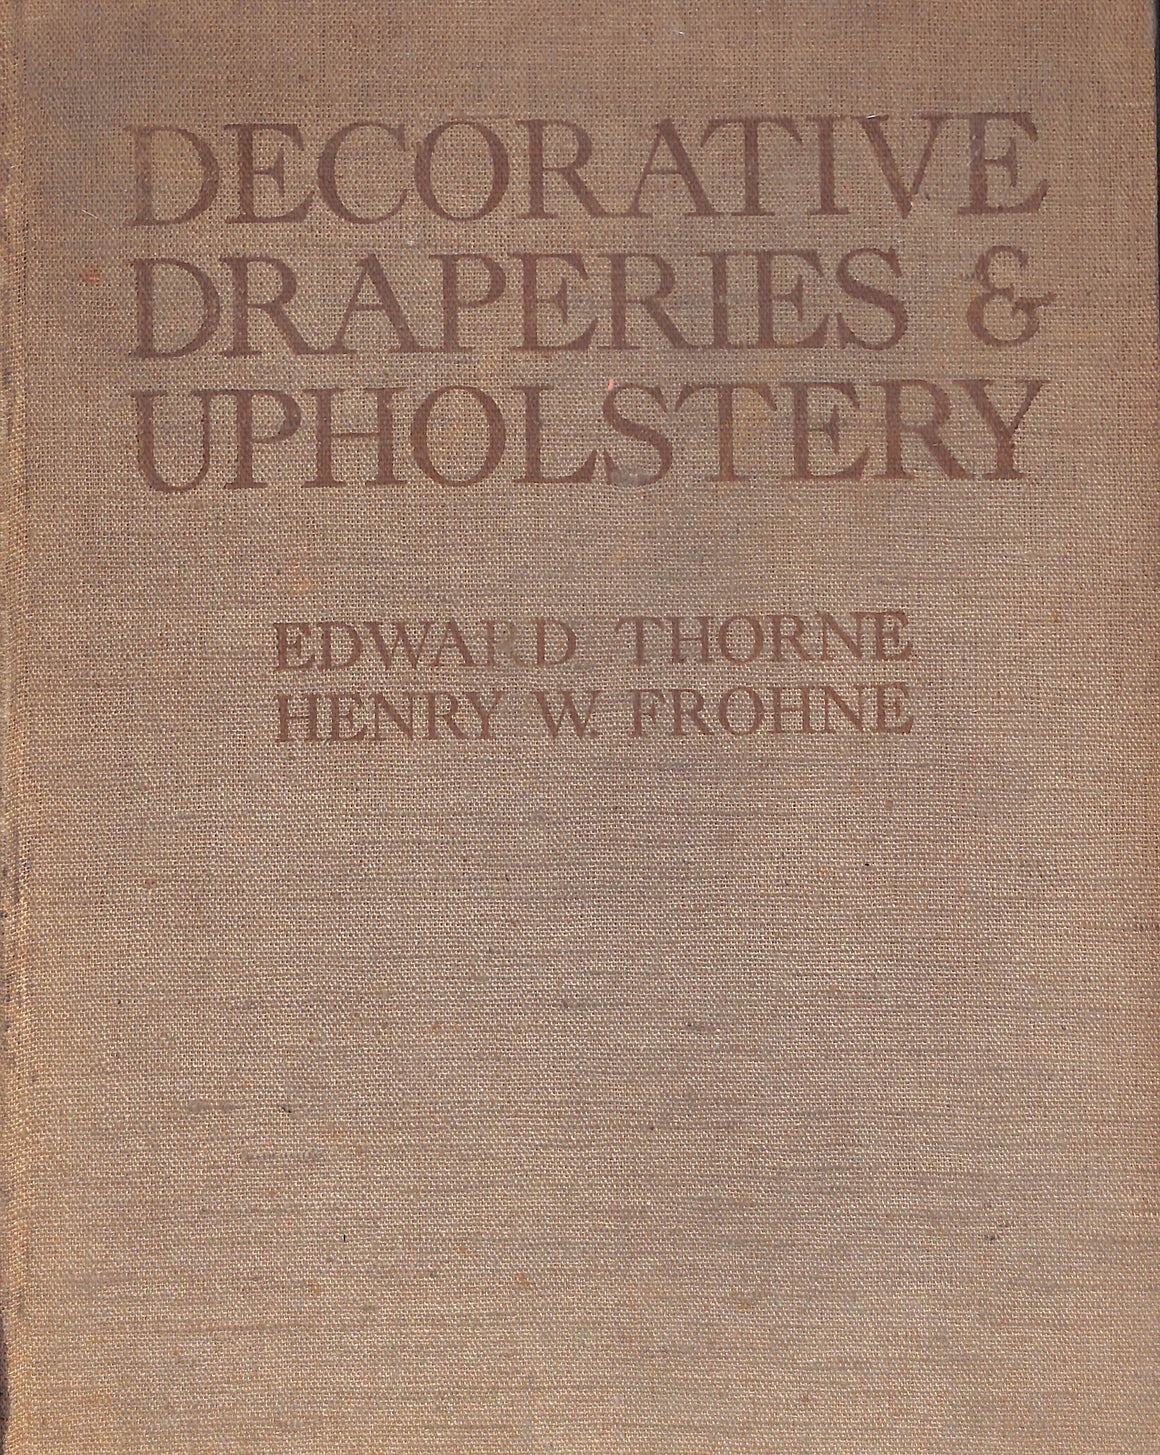 "Decorative Draperies & Upholstery" 1929 THORNE, Edward and FROHNE, Henry W.